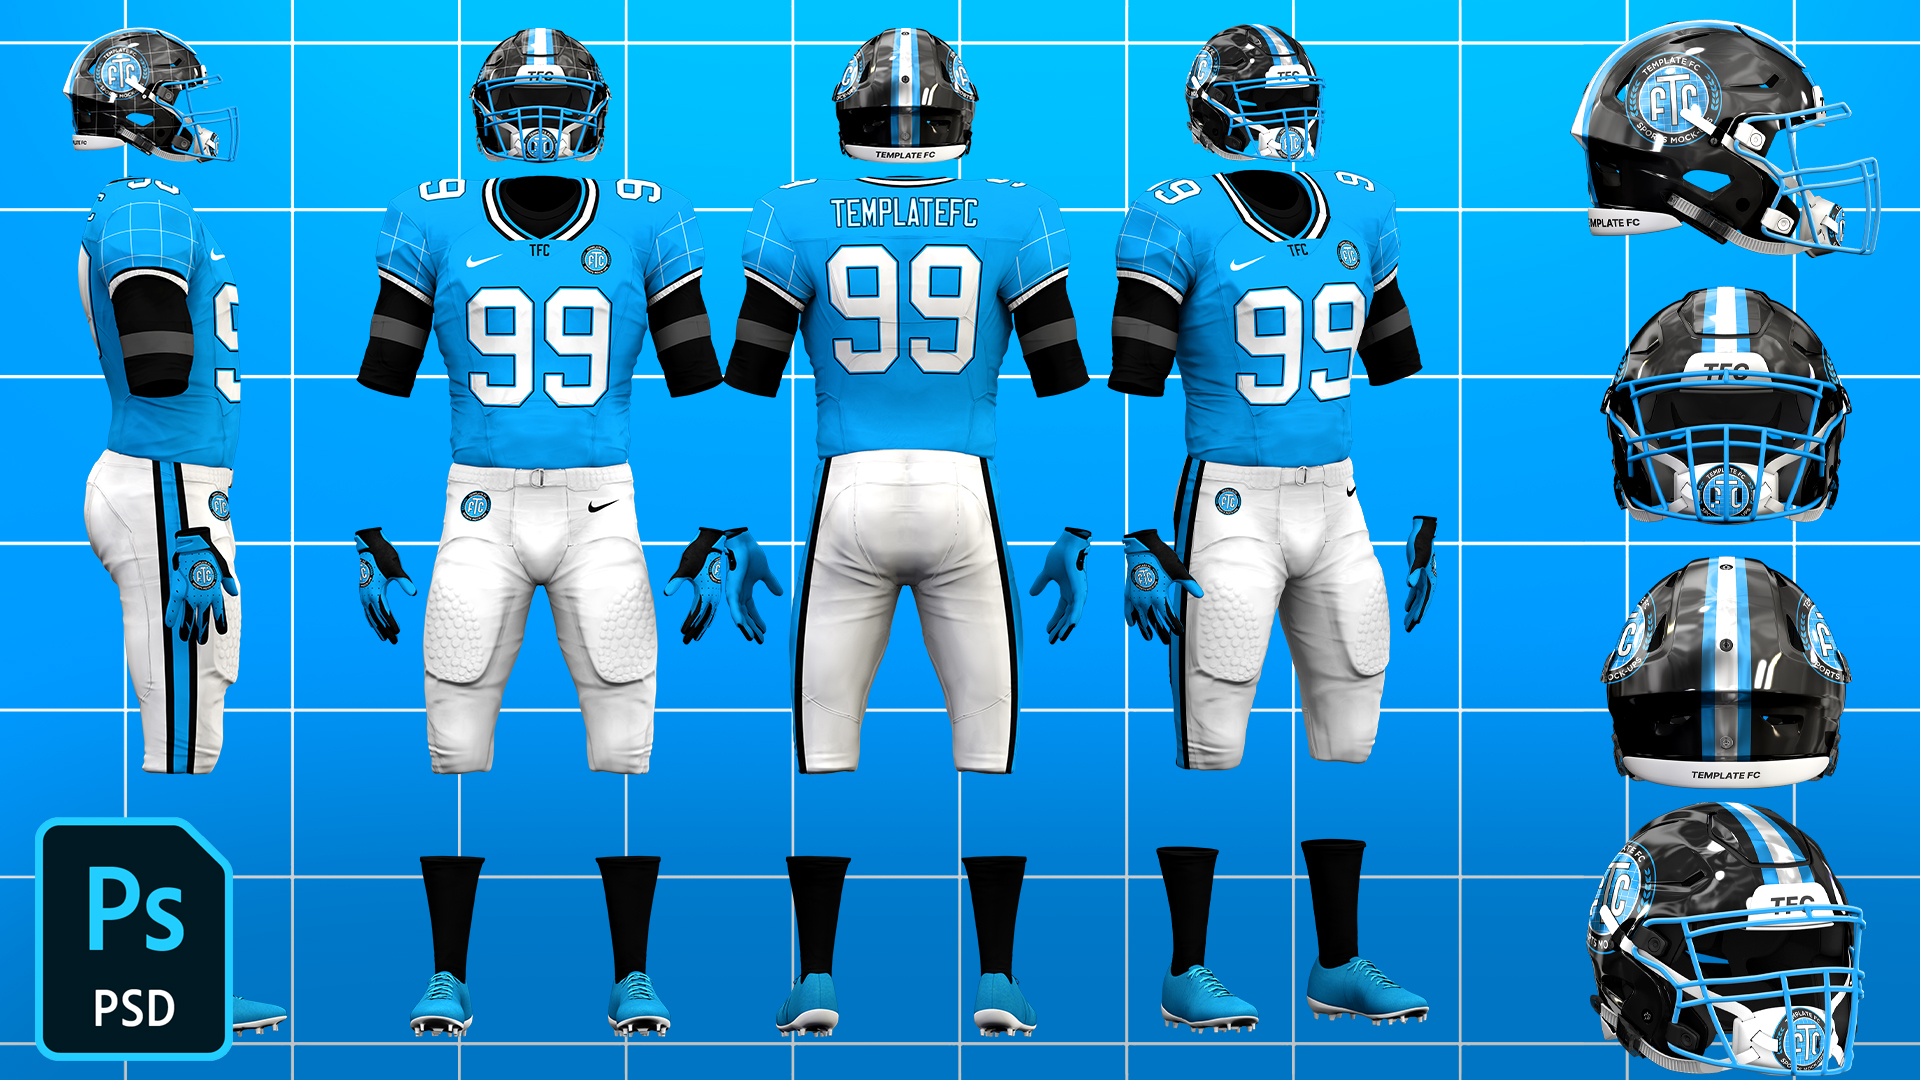 Designer Mocks Up What 'Color Rush' Uniforms Will Look Like This